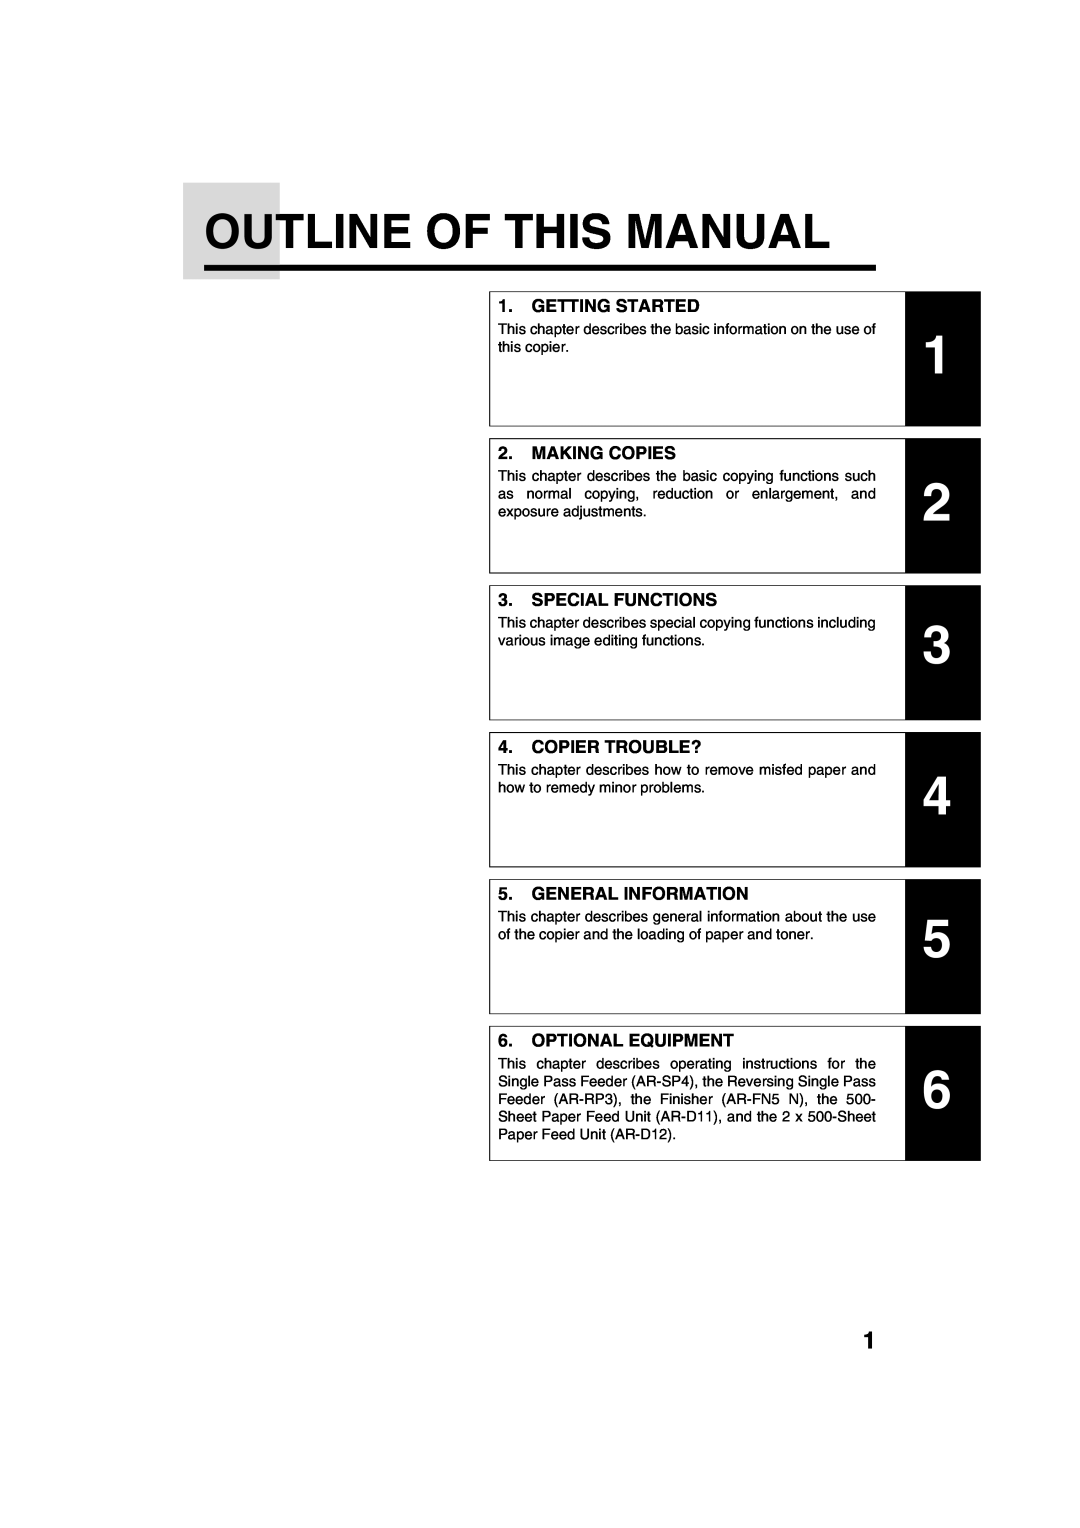 Sharp AR-M208 Outline Of This Manual, Getting Started, Making Copies, Special Functions, Copier Trouble?, this copier 